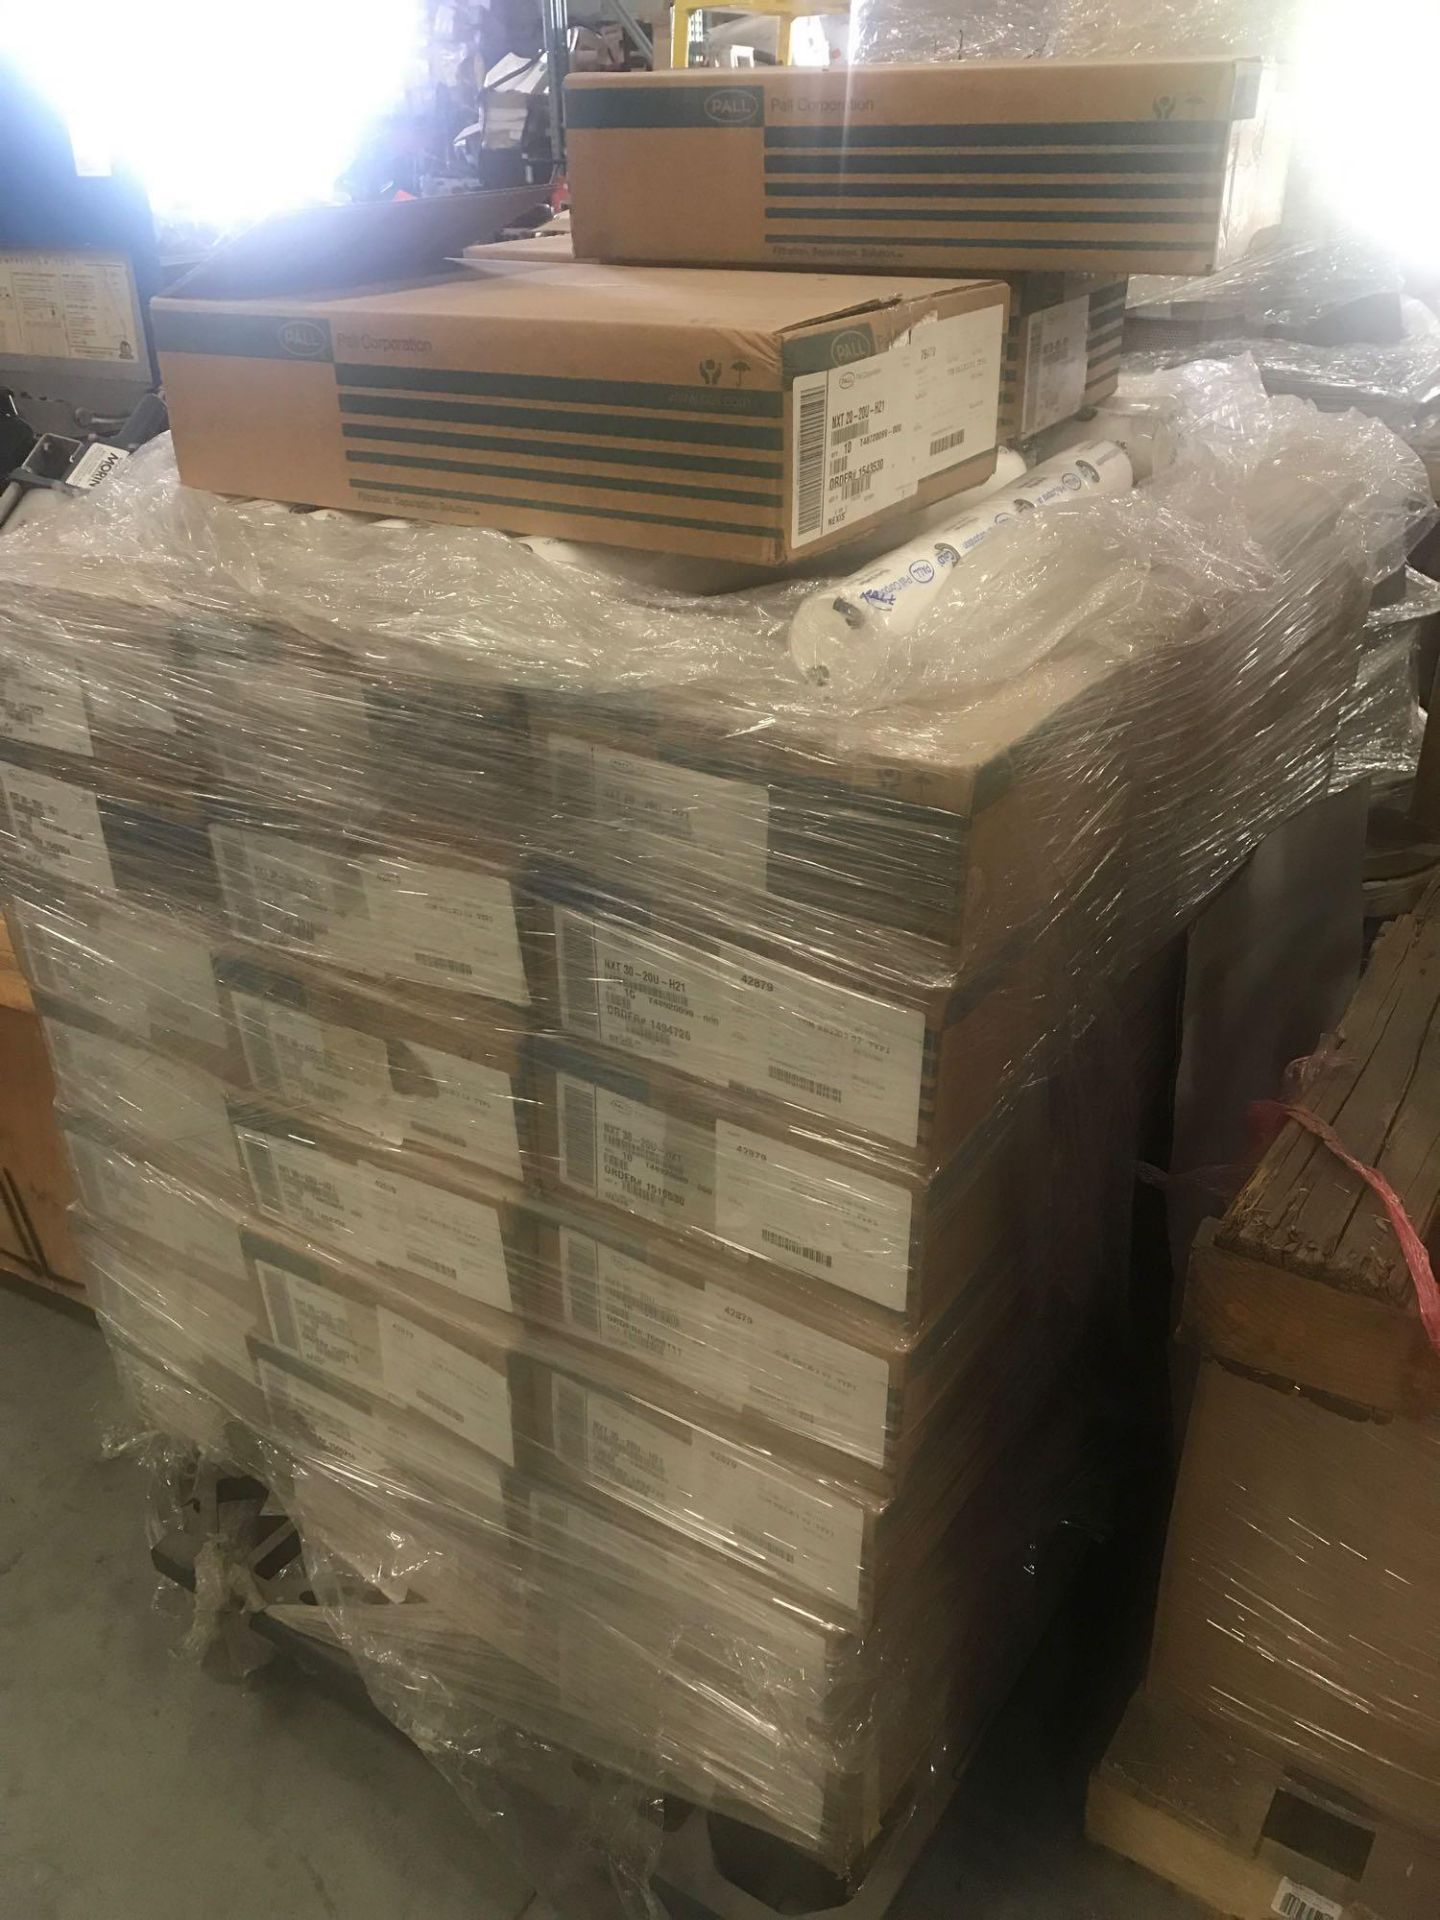 PALLET OF PALL CORPORATION WATER FILTERS - Image 2 of 3